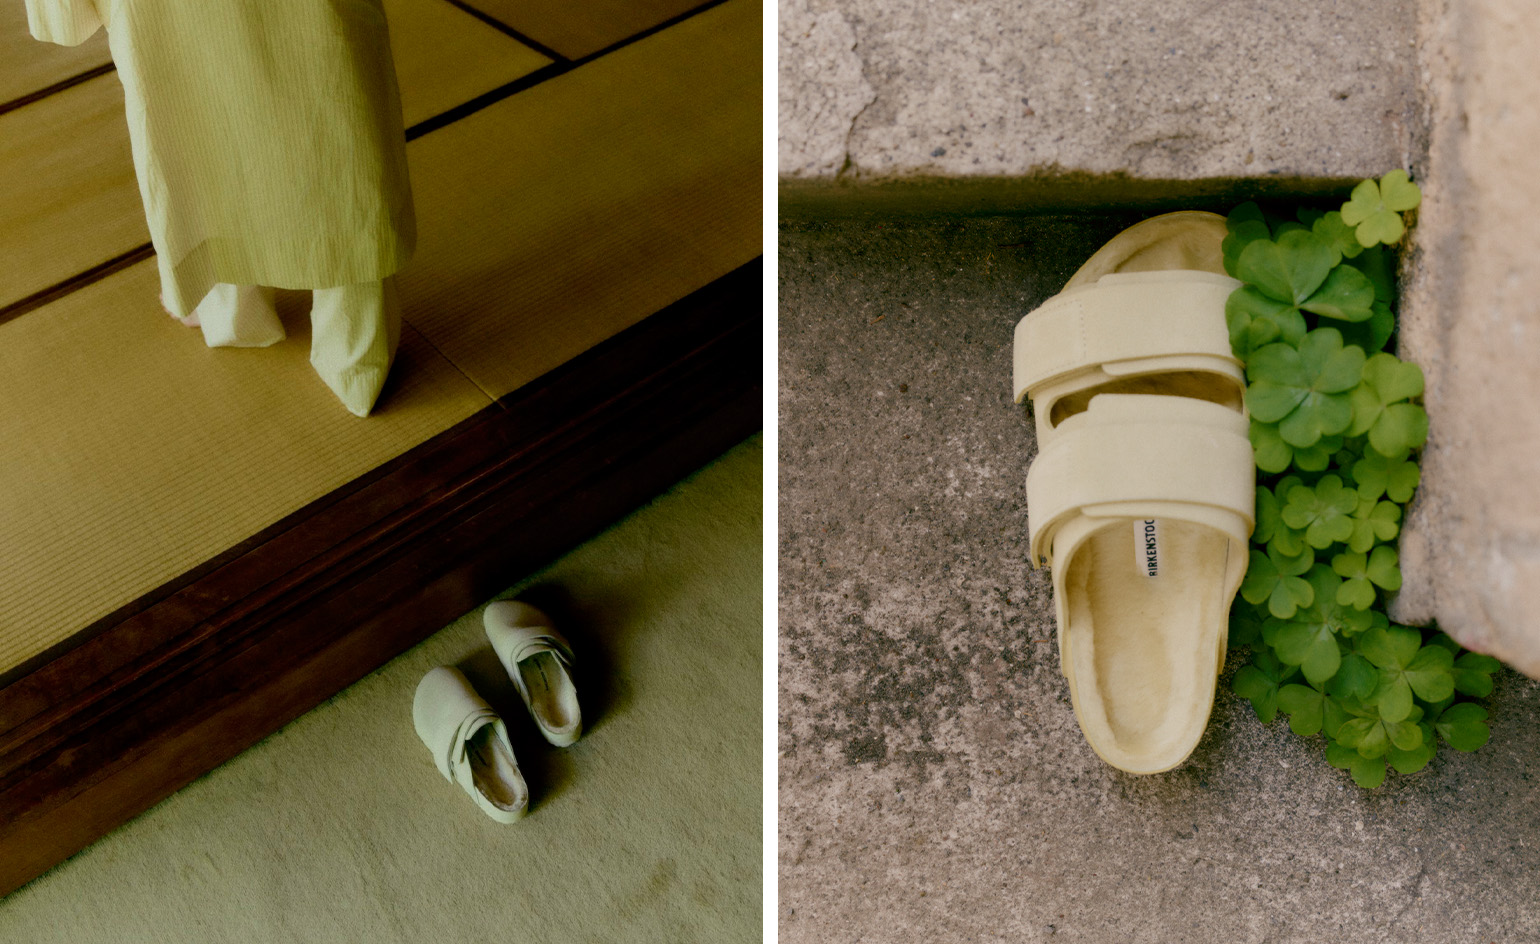 Birkenstock has united with Tekla on a collection for home | Wallpaper